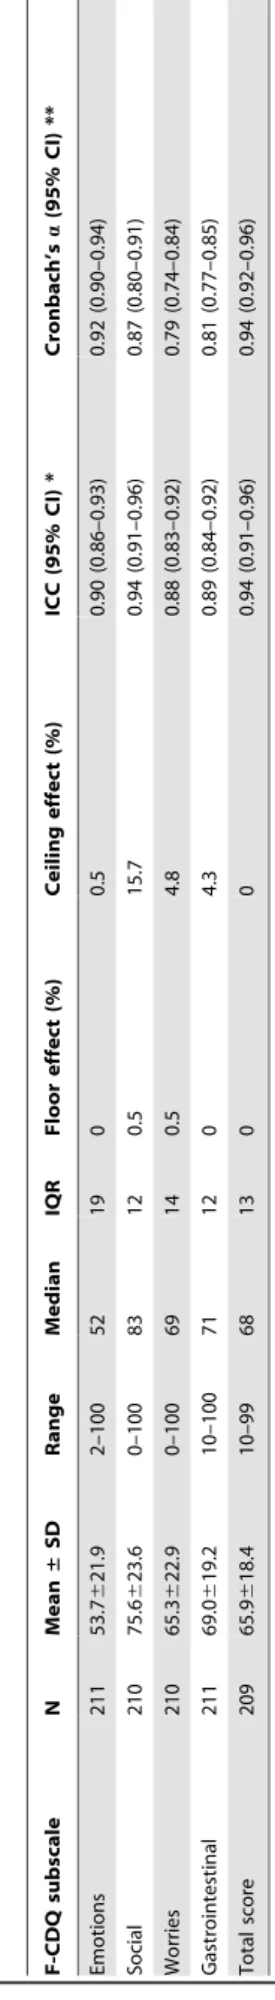 Table 1. Socio-demographic and clinical characteristics of the patients with celiac disease included in the validation study of the French version of the ‘‘Celiac Disease Questionnaire’’.